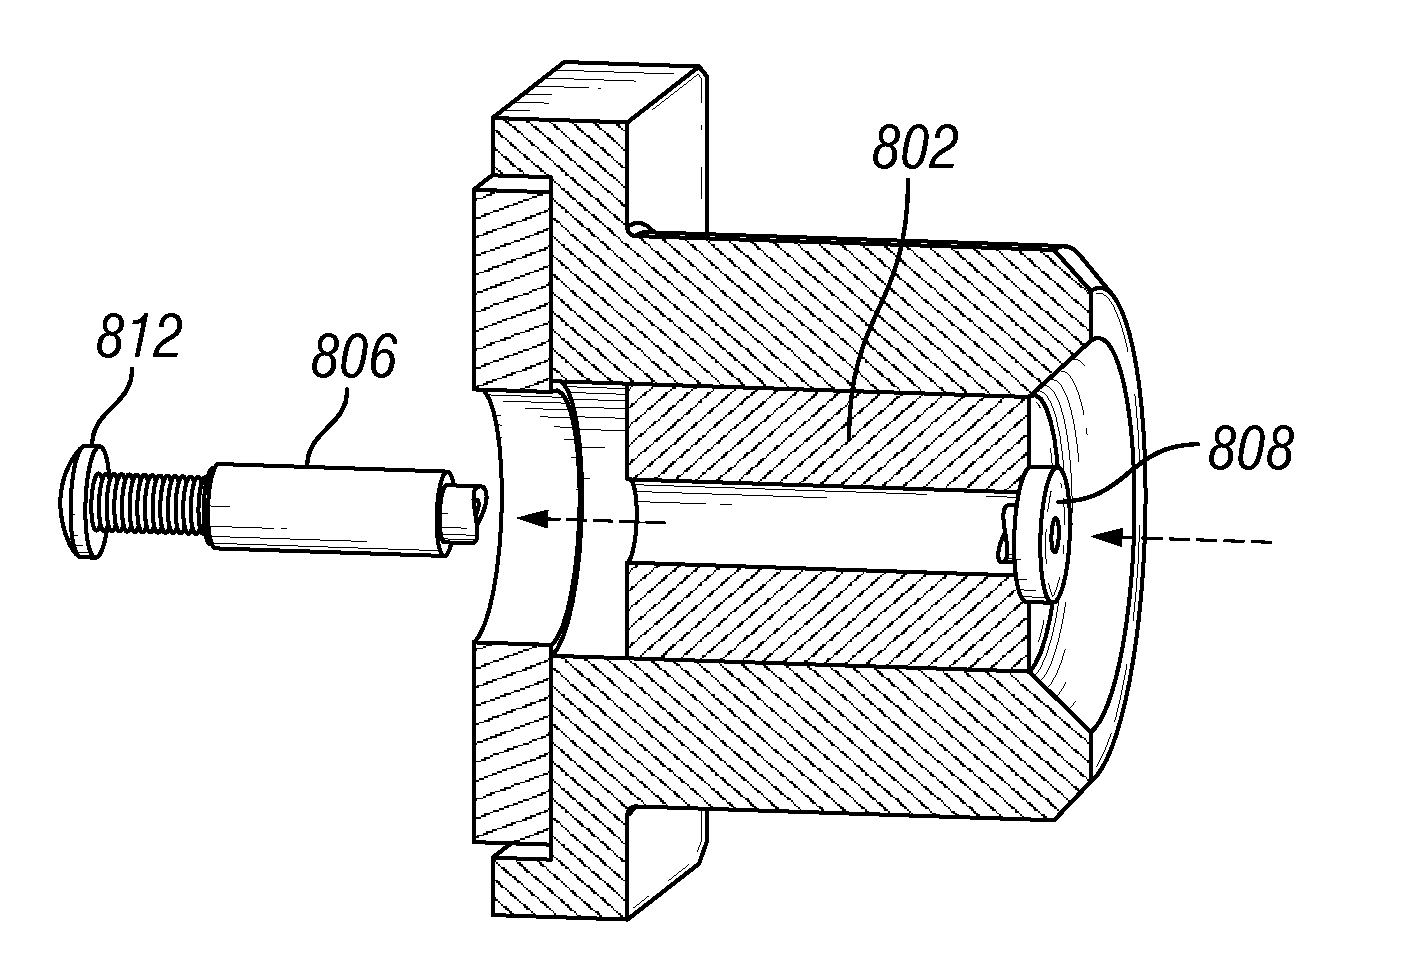 Pressure actuated flow control in an abrasive jet perforating tool